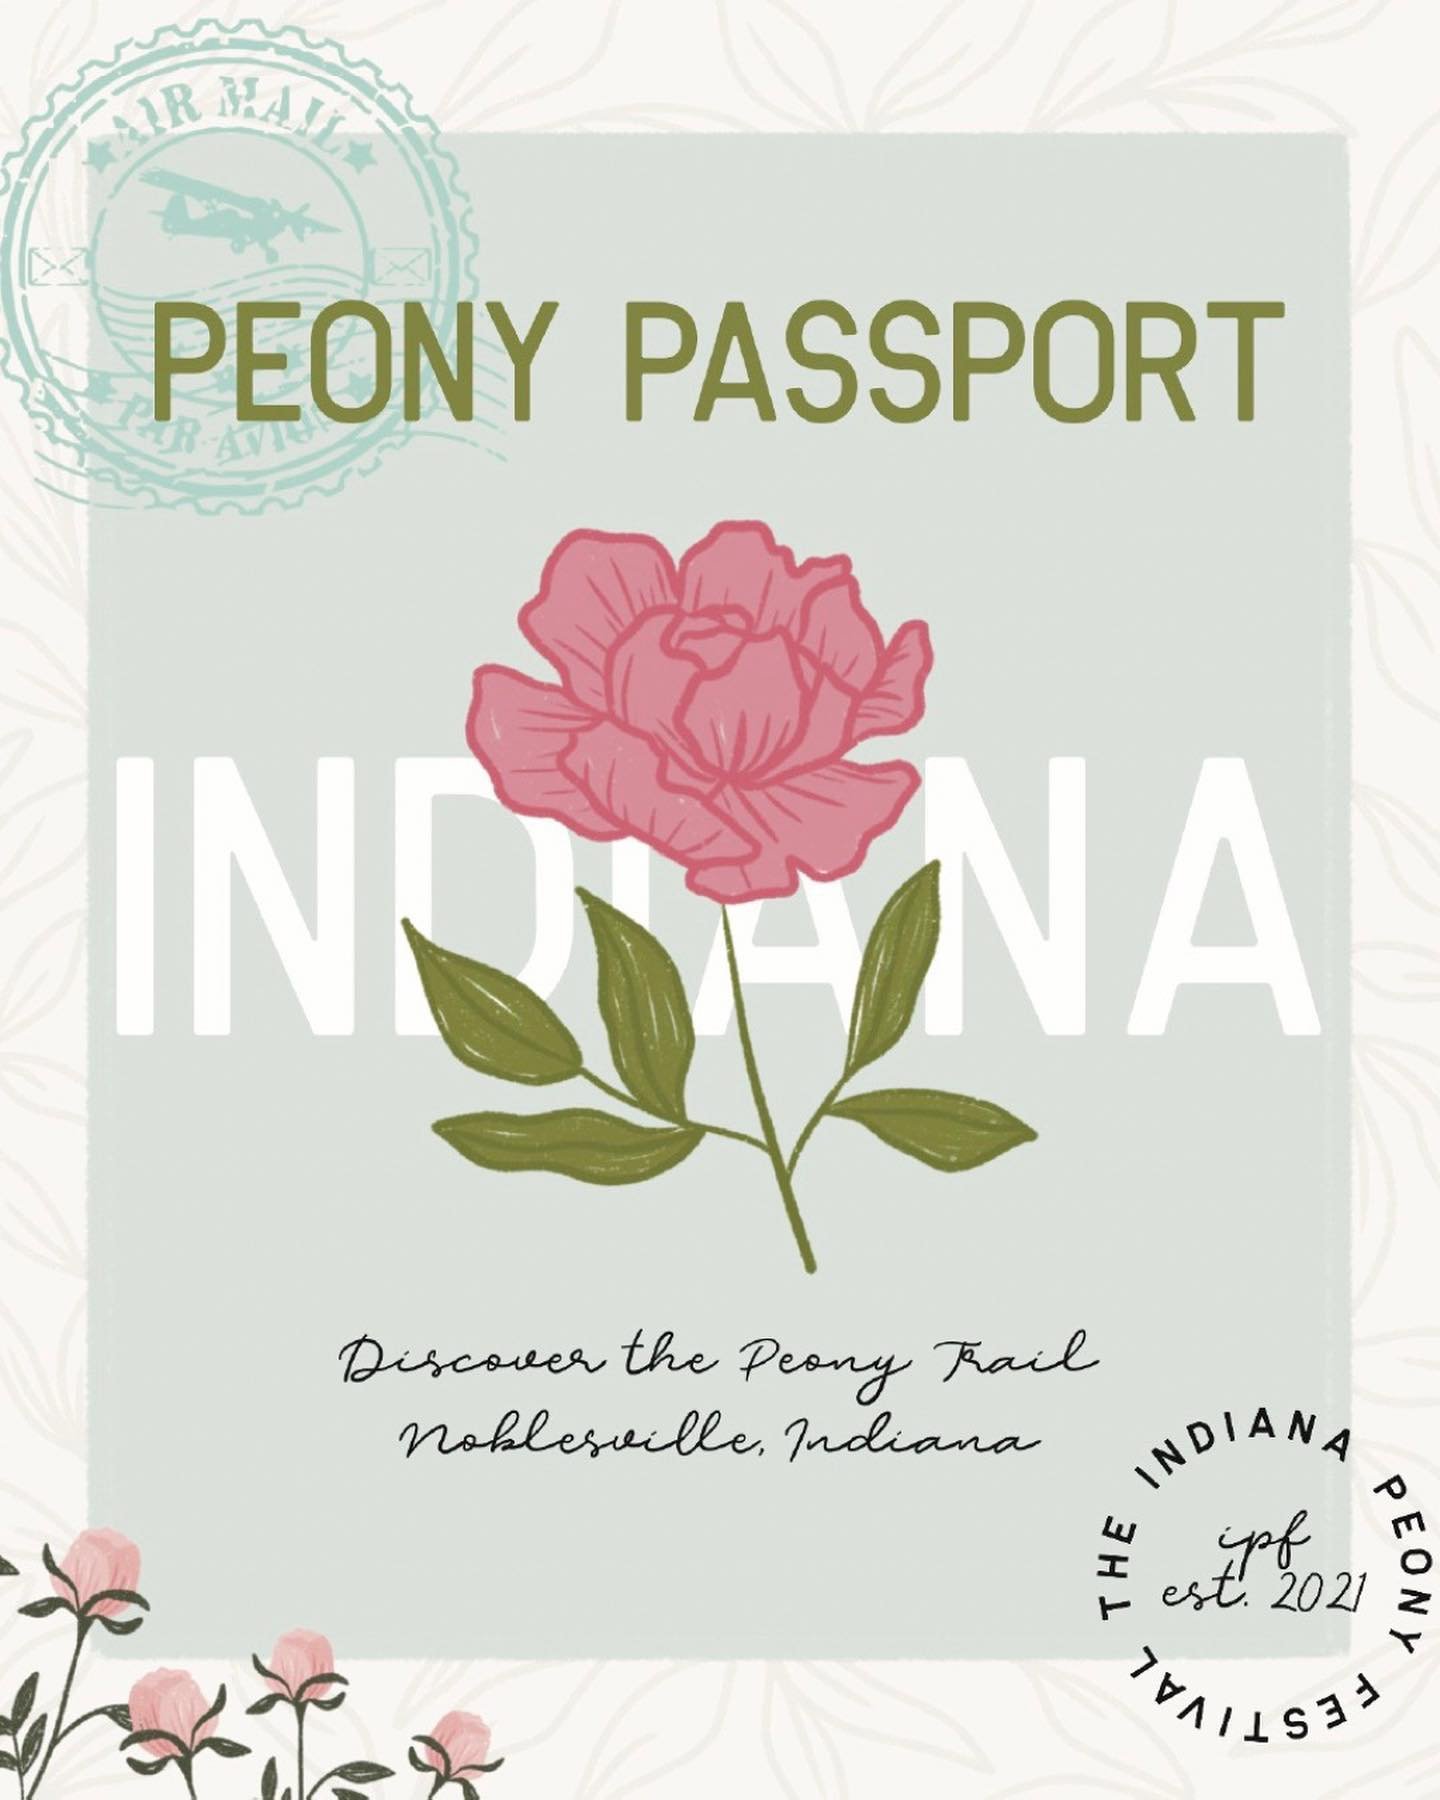 Introducing&hellip; drumroll🥁&hellip; our never-been-done-before PEONY PASSPORTS 🌸🛂🗺 Thanks to our Peony Passport sponsor &amp; partner SMC Corporation, our Indiana Peony Trail est. in 2021 is now an experience that YOU can take part of throughou